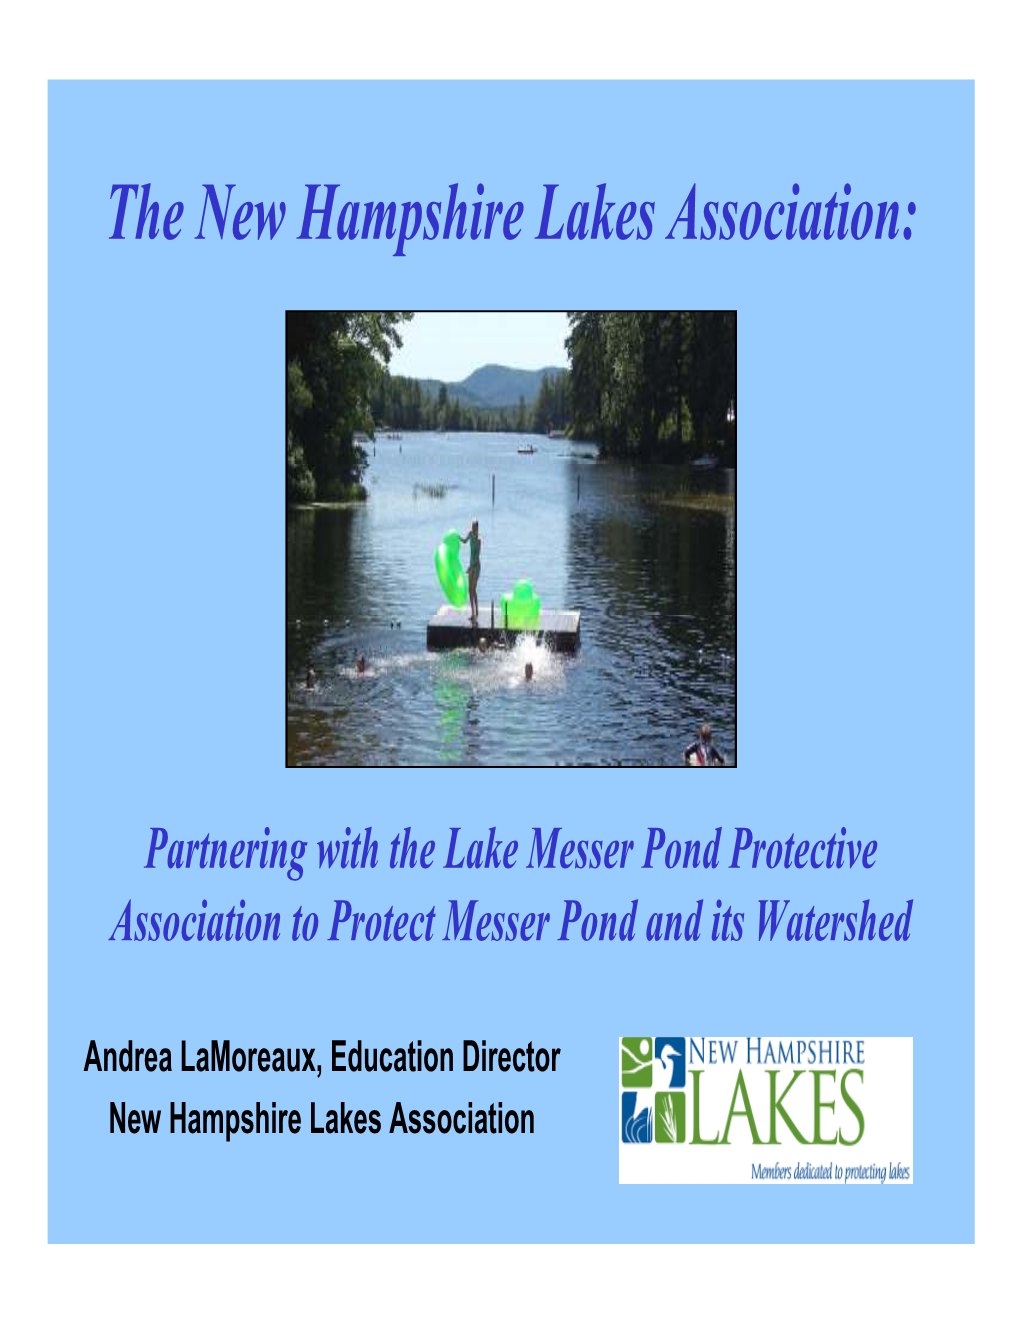 The New Hampshire Lakes Association